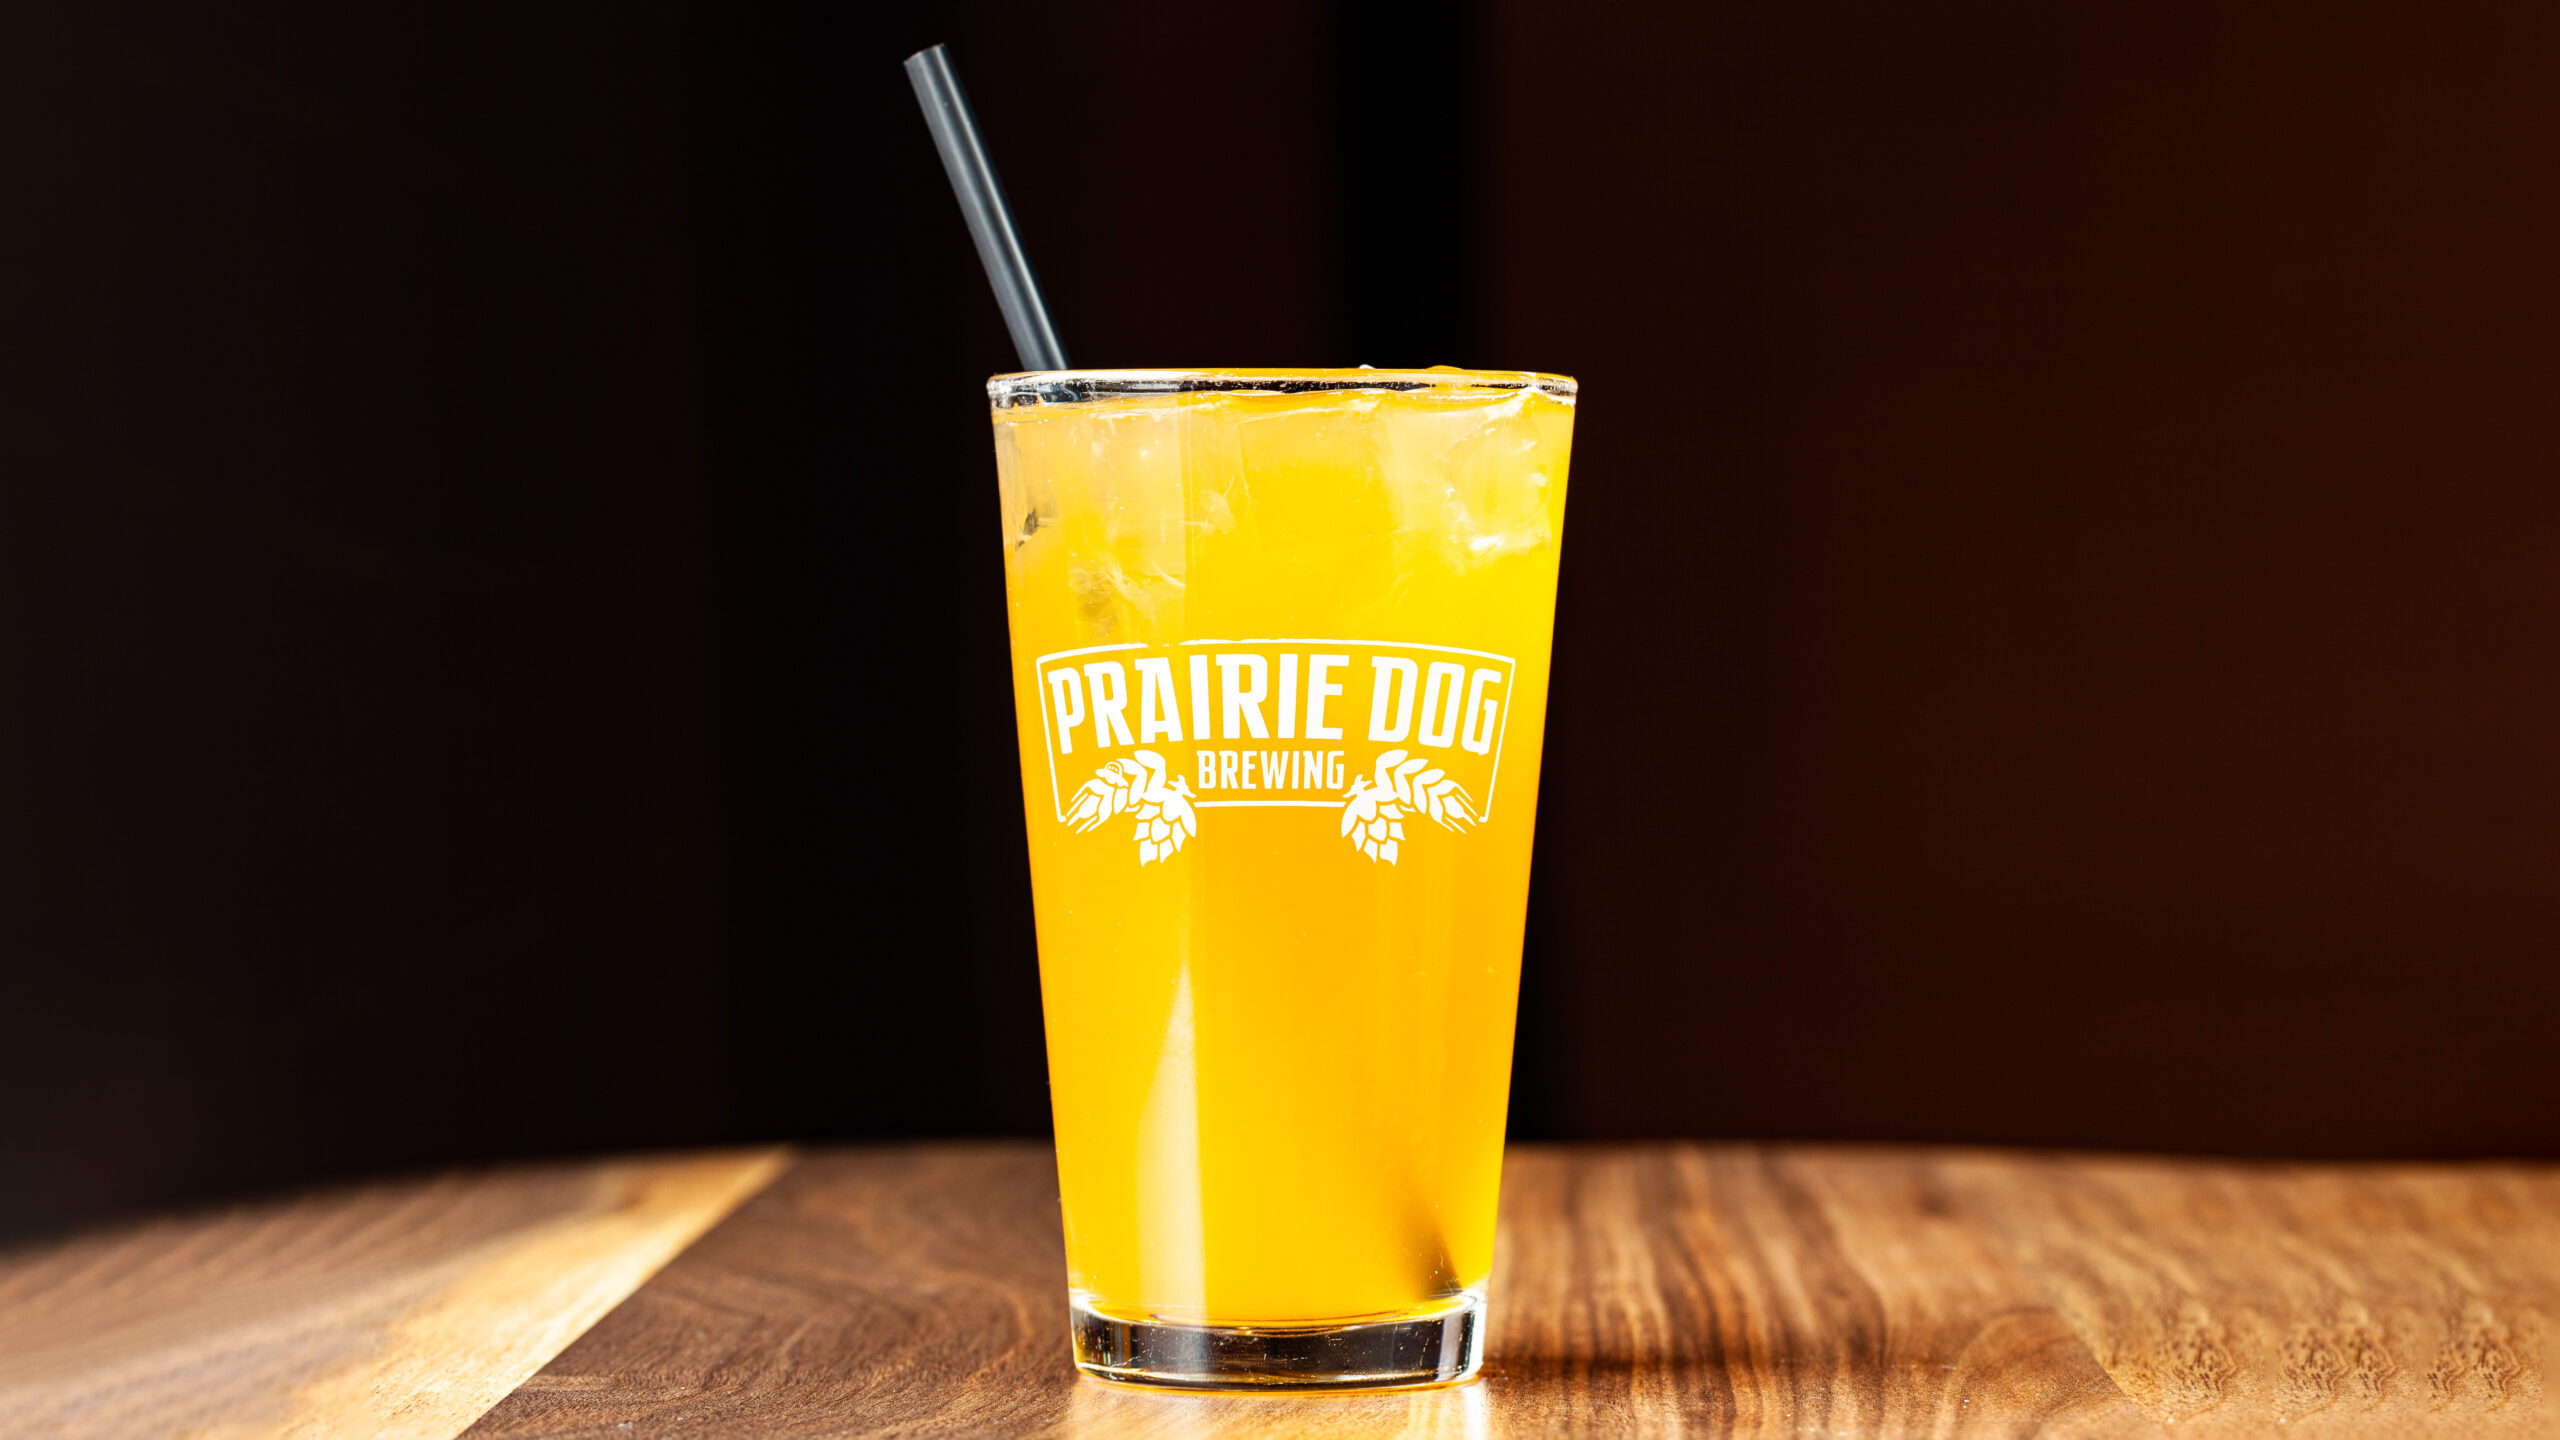 A glass of Prarie Dog Brewing's house-brewed iced tea.